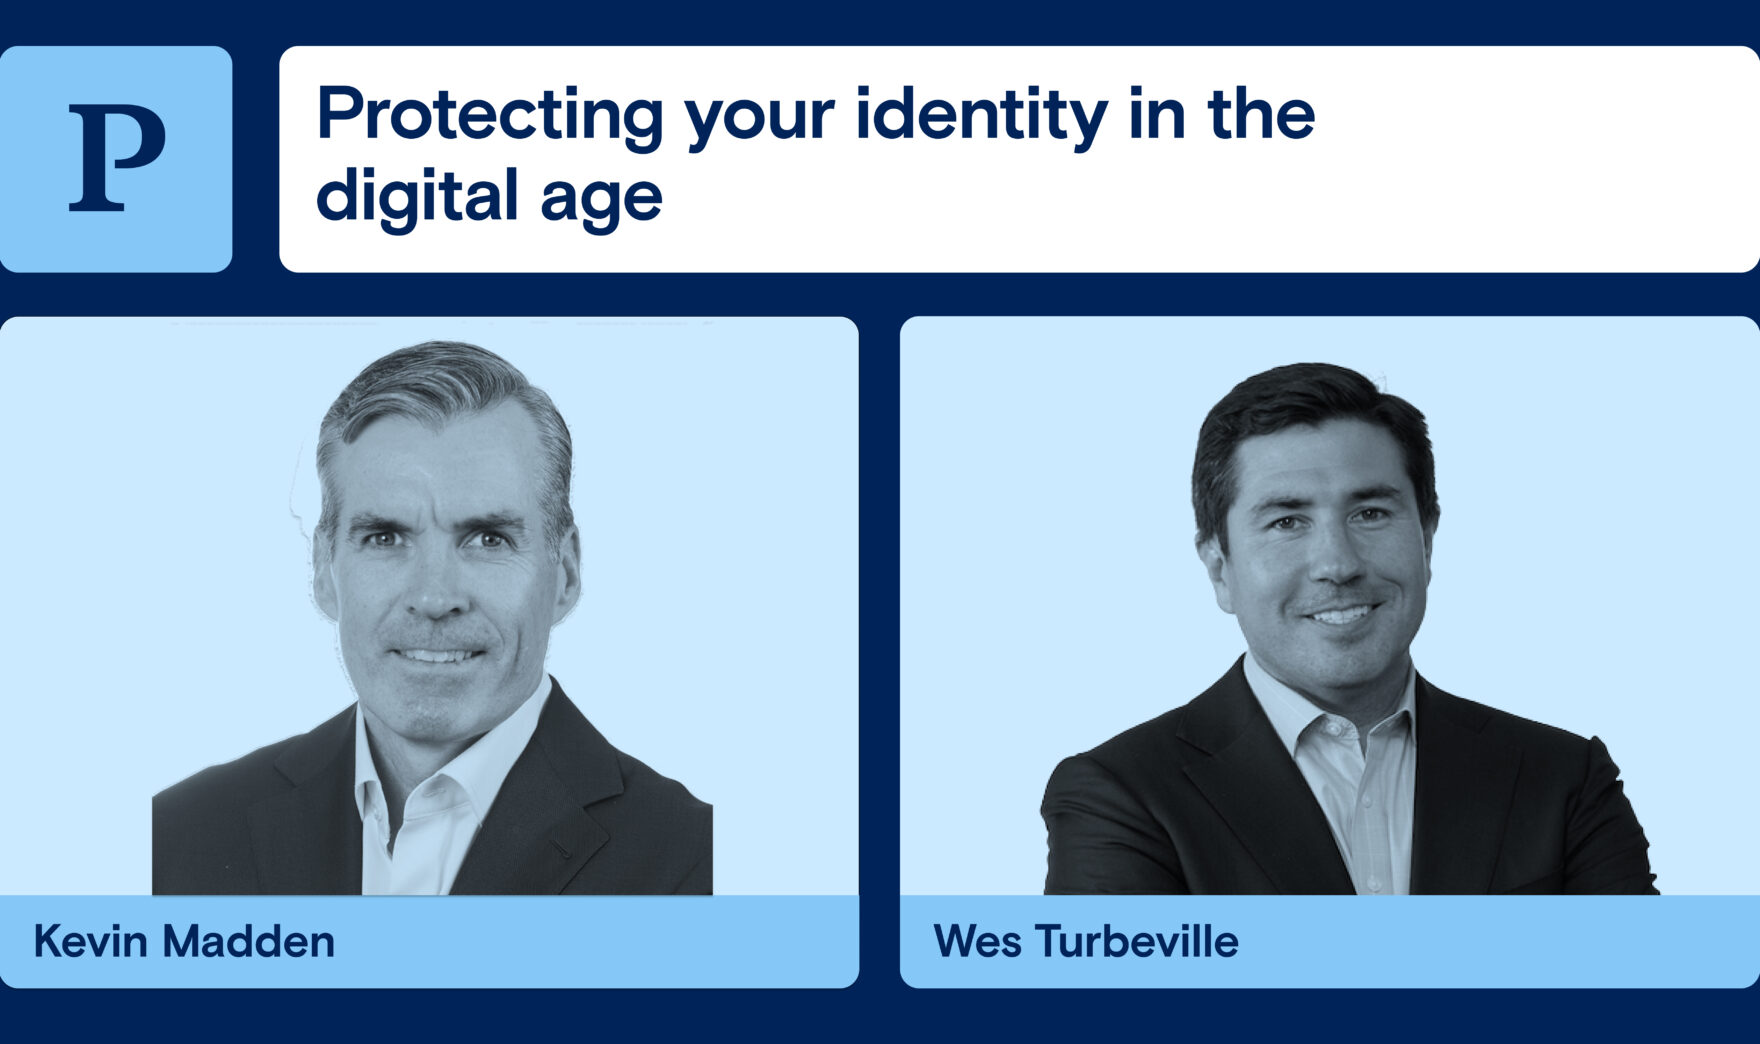 Protecting your identity in the digital age